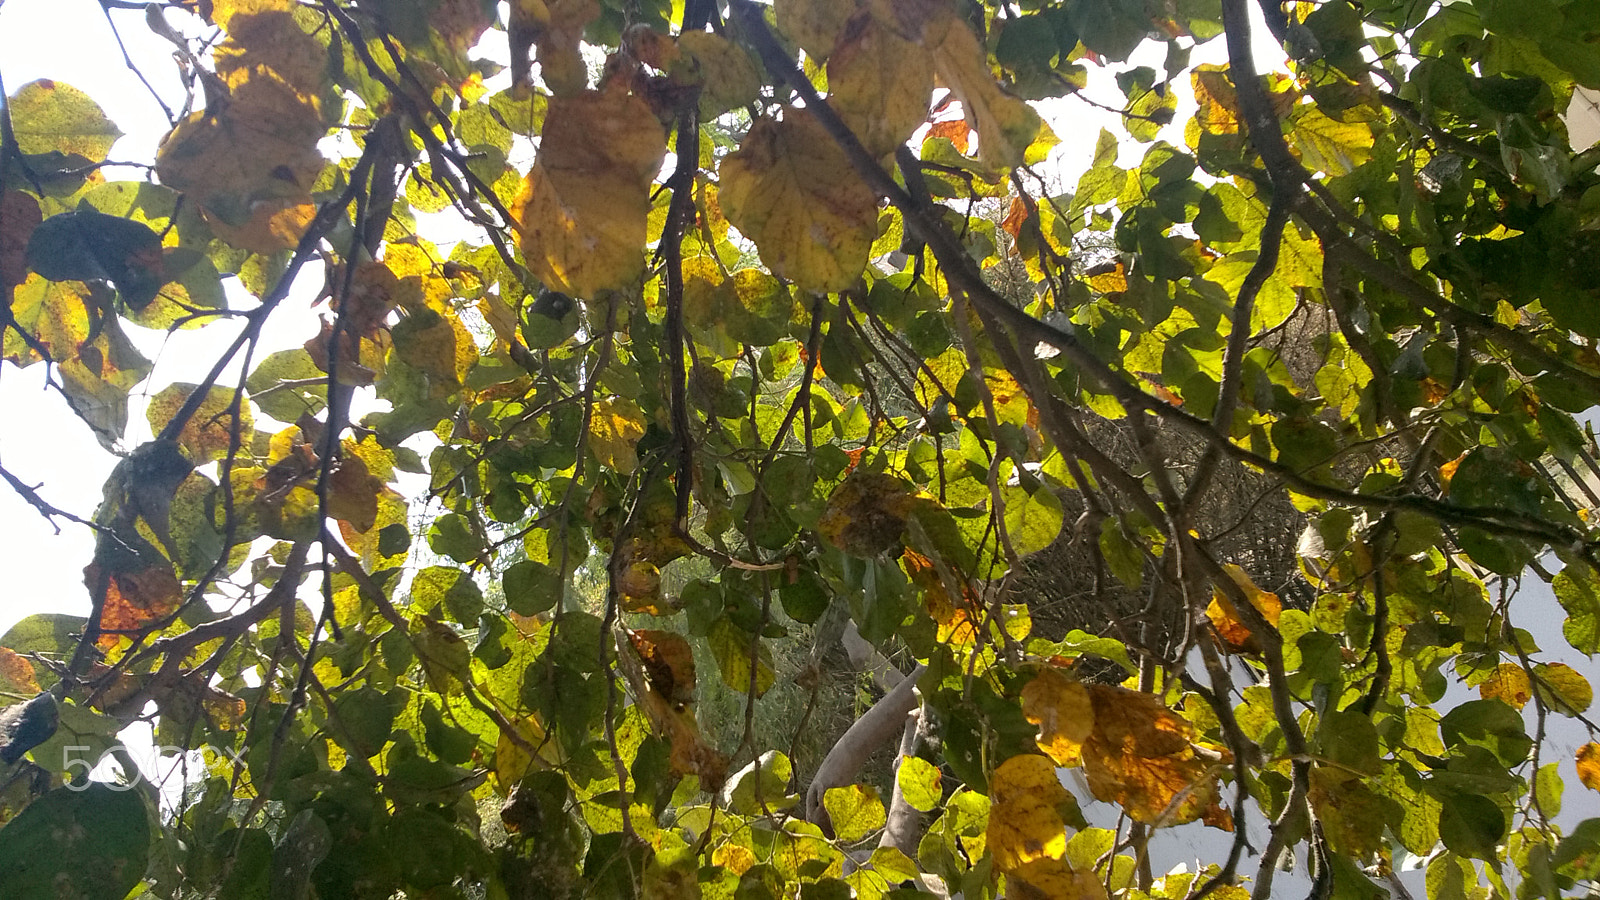 Nokia Lumia 730 Dual SIM sample photo. Leaves in the afternoon photography